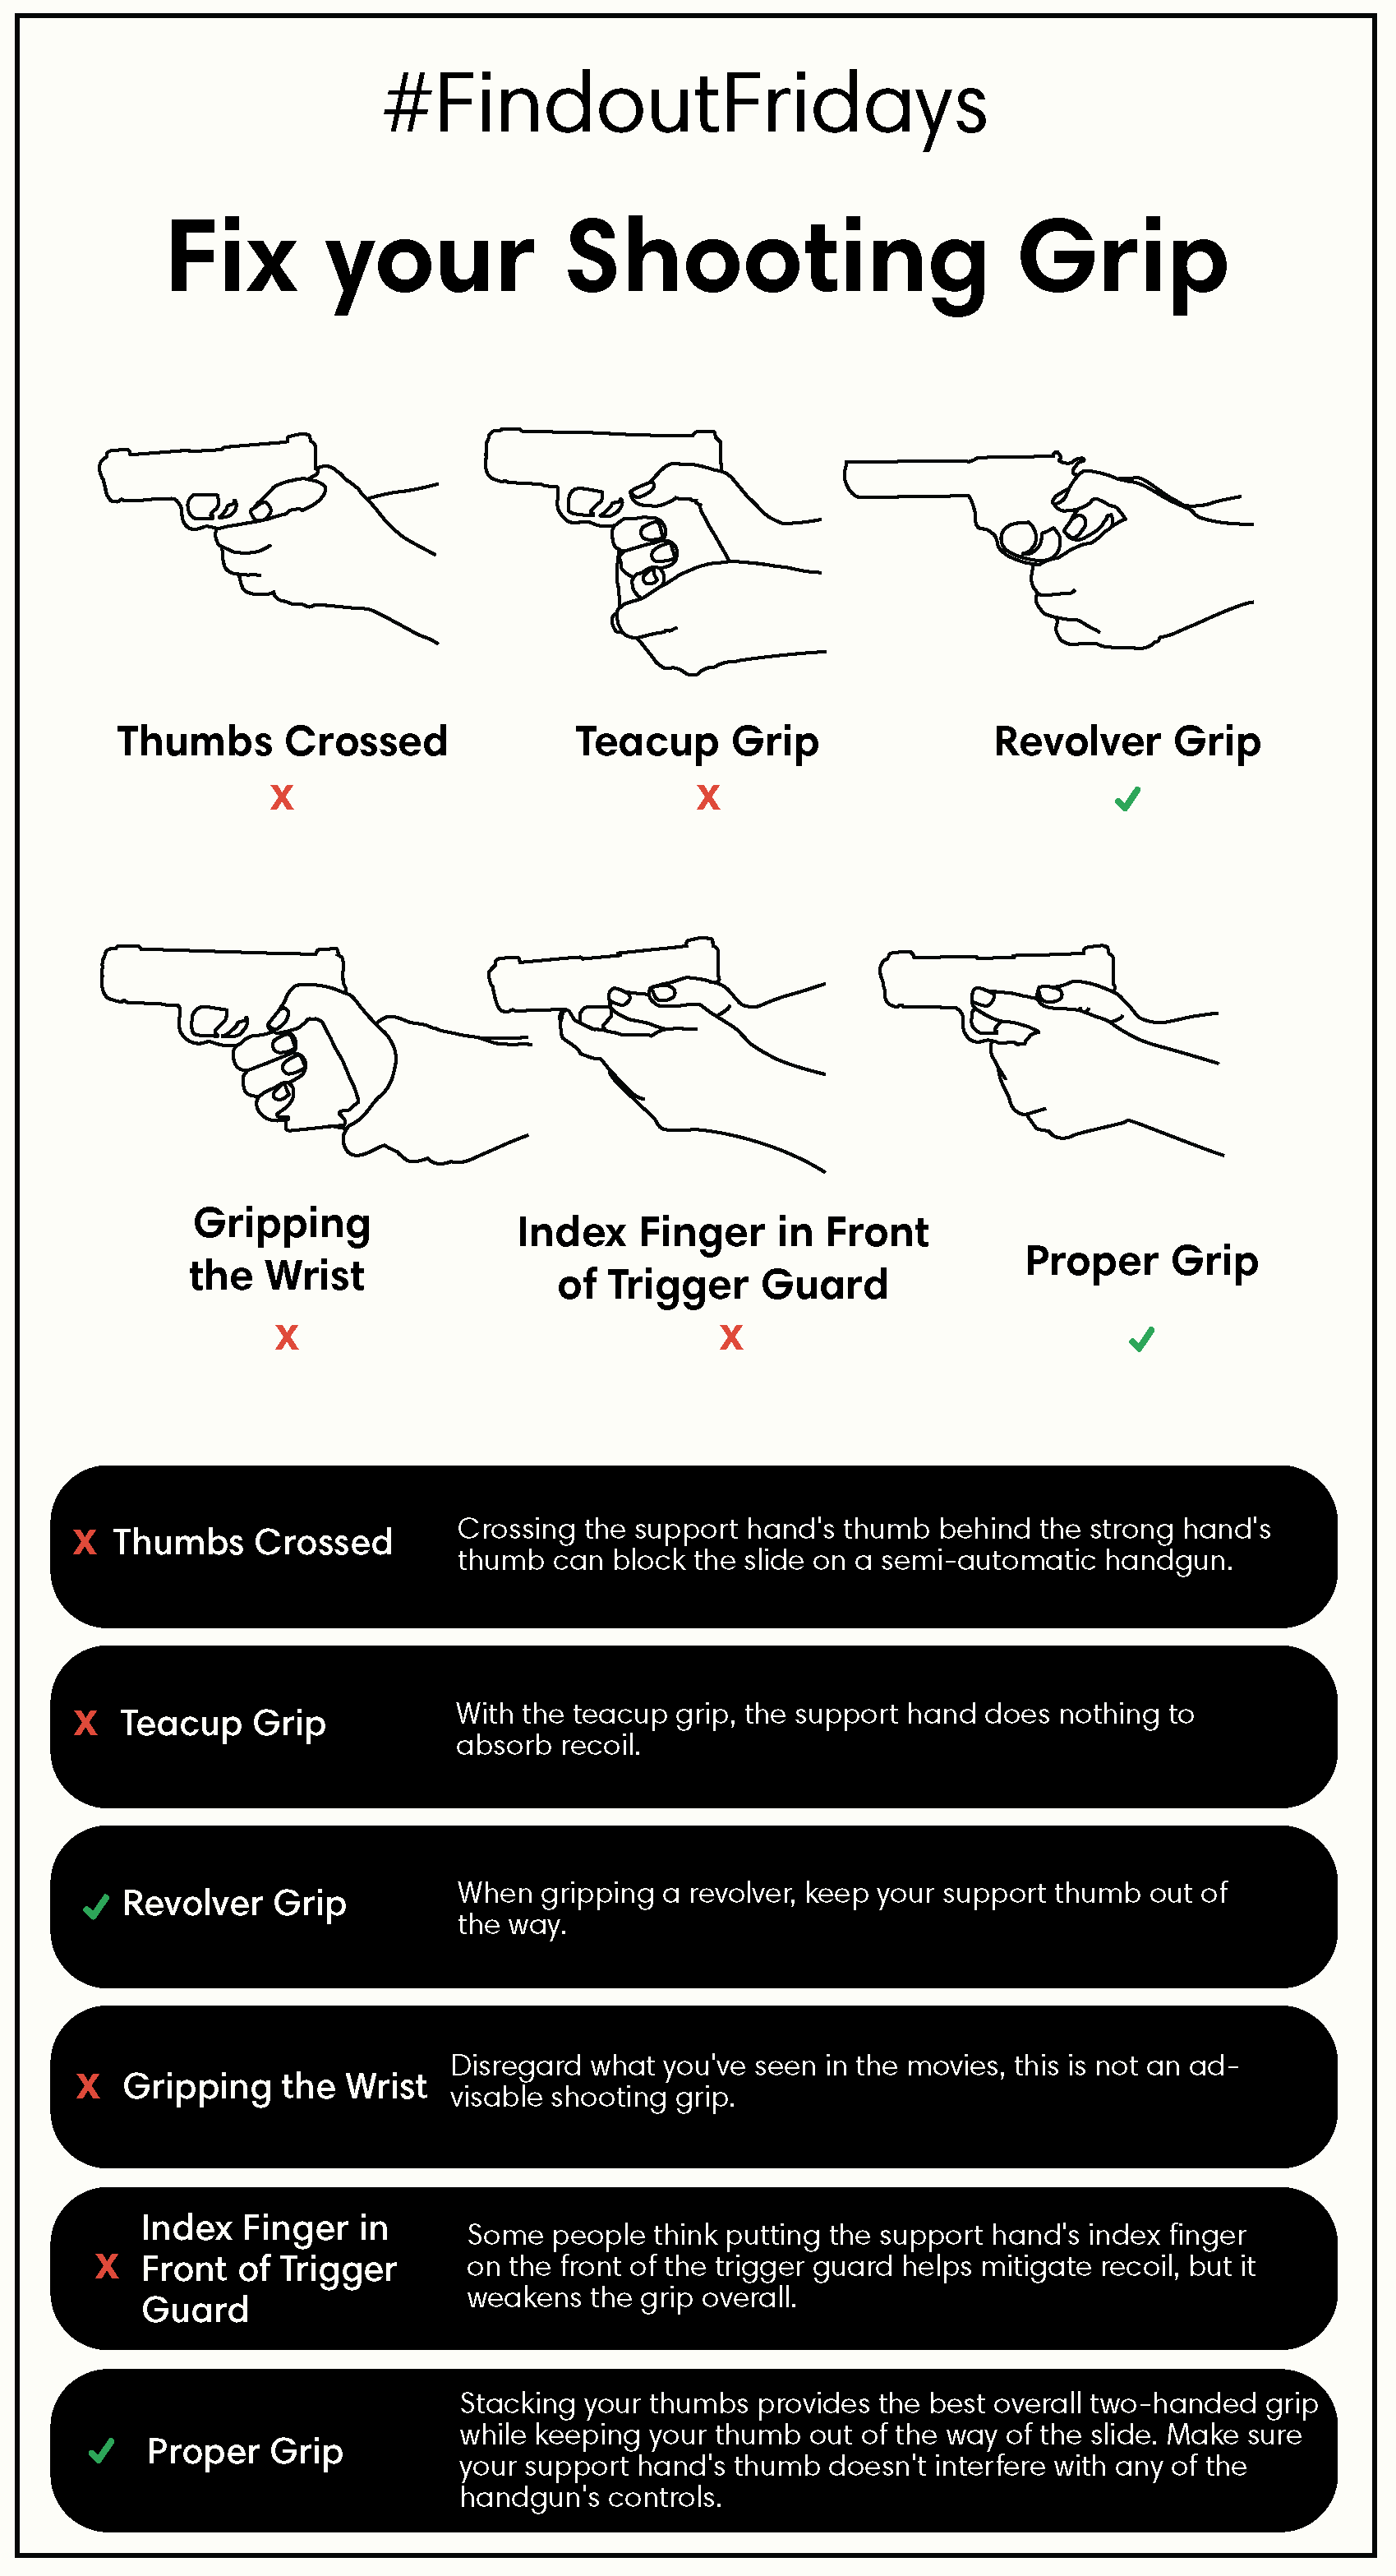 Fix Your Shooting Grip